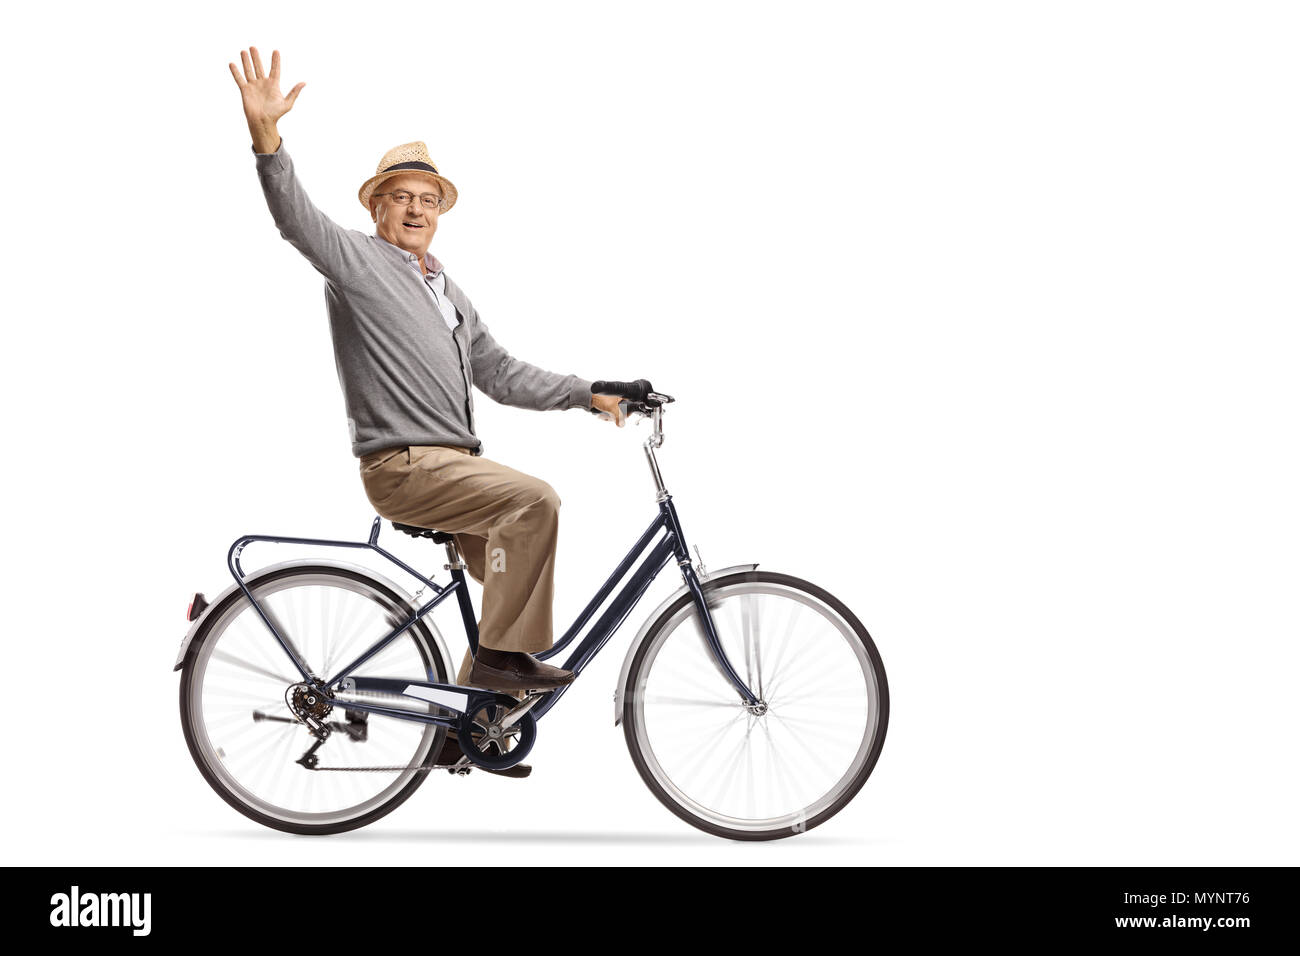 Mature man riding a bicycle and waving at the camera isolated on white background Stock Photo